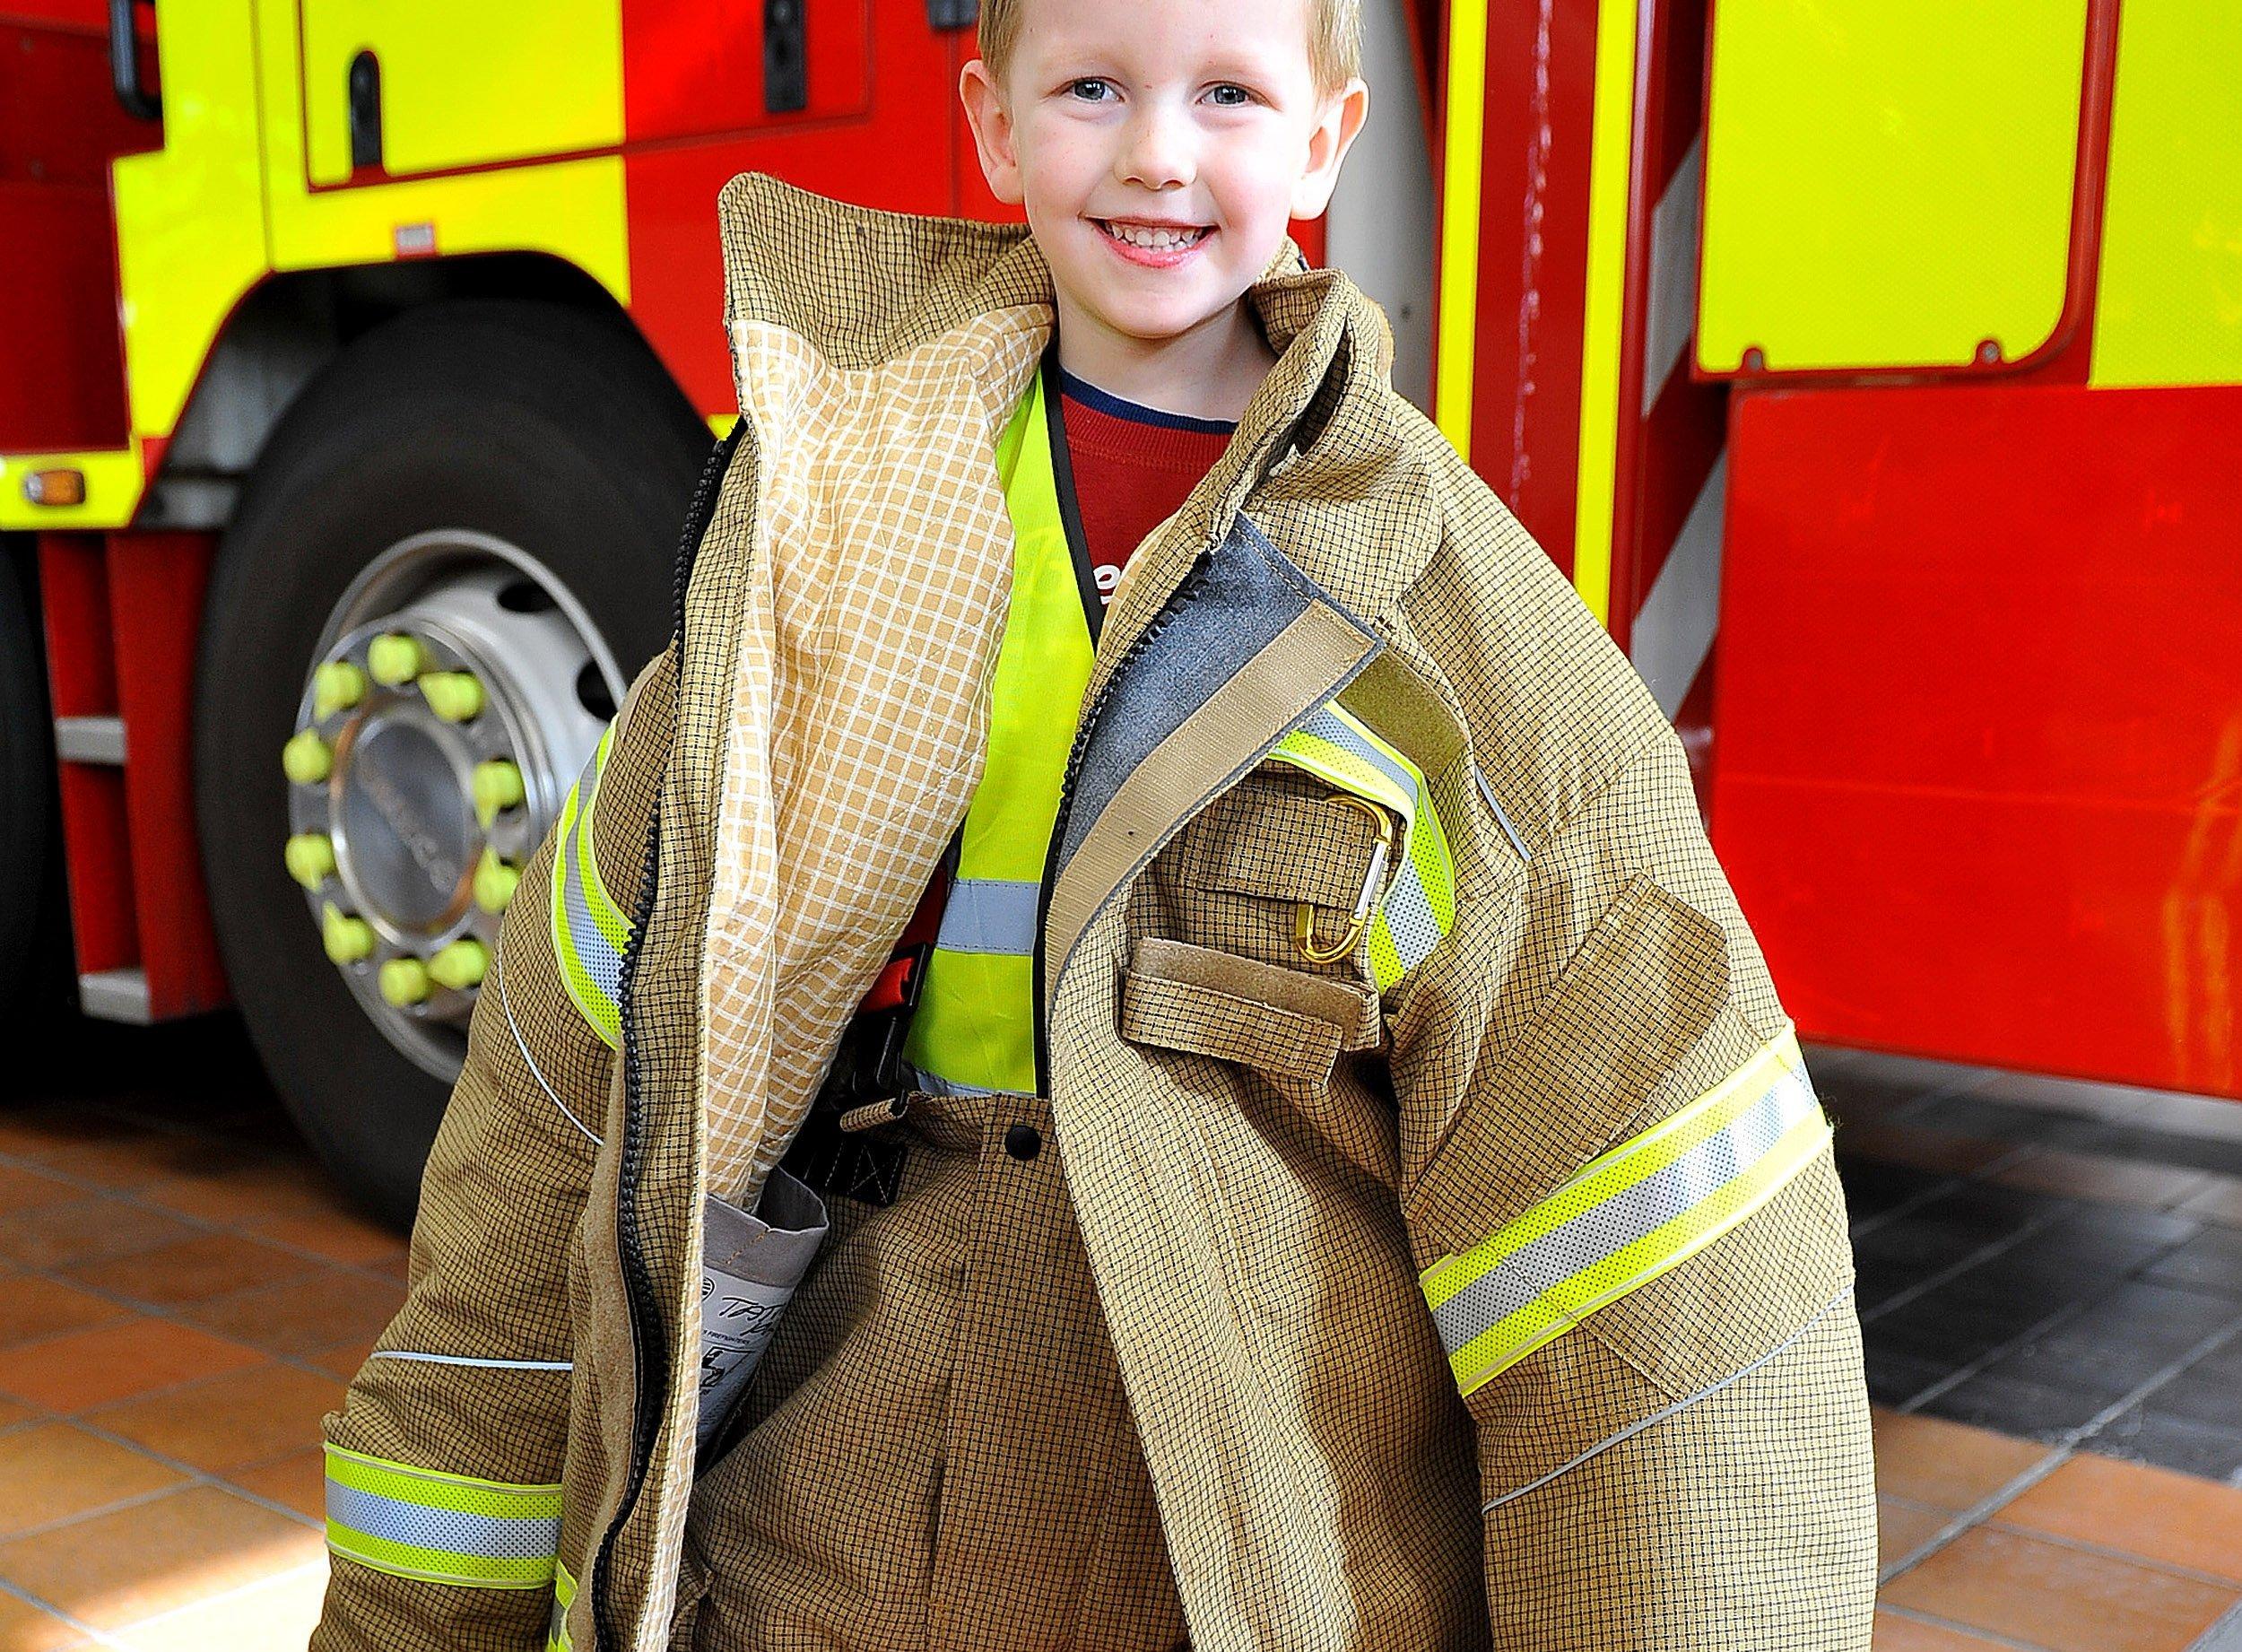 Pumpkin Patch Day Nursery at Worthing Fire Station. Pictures: Steve Robards SR20021301